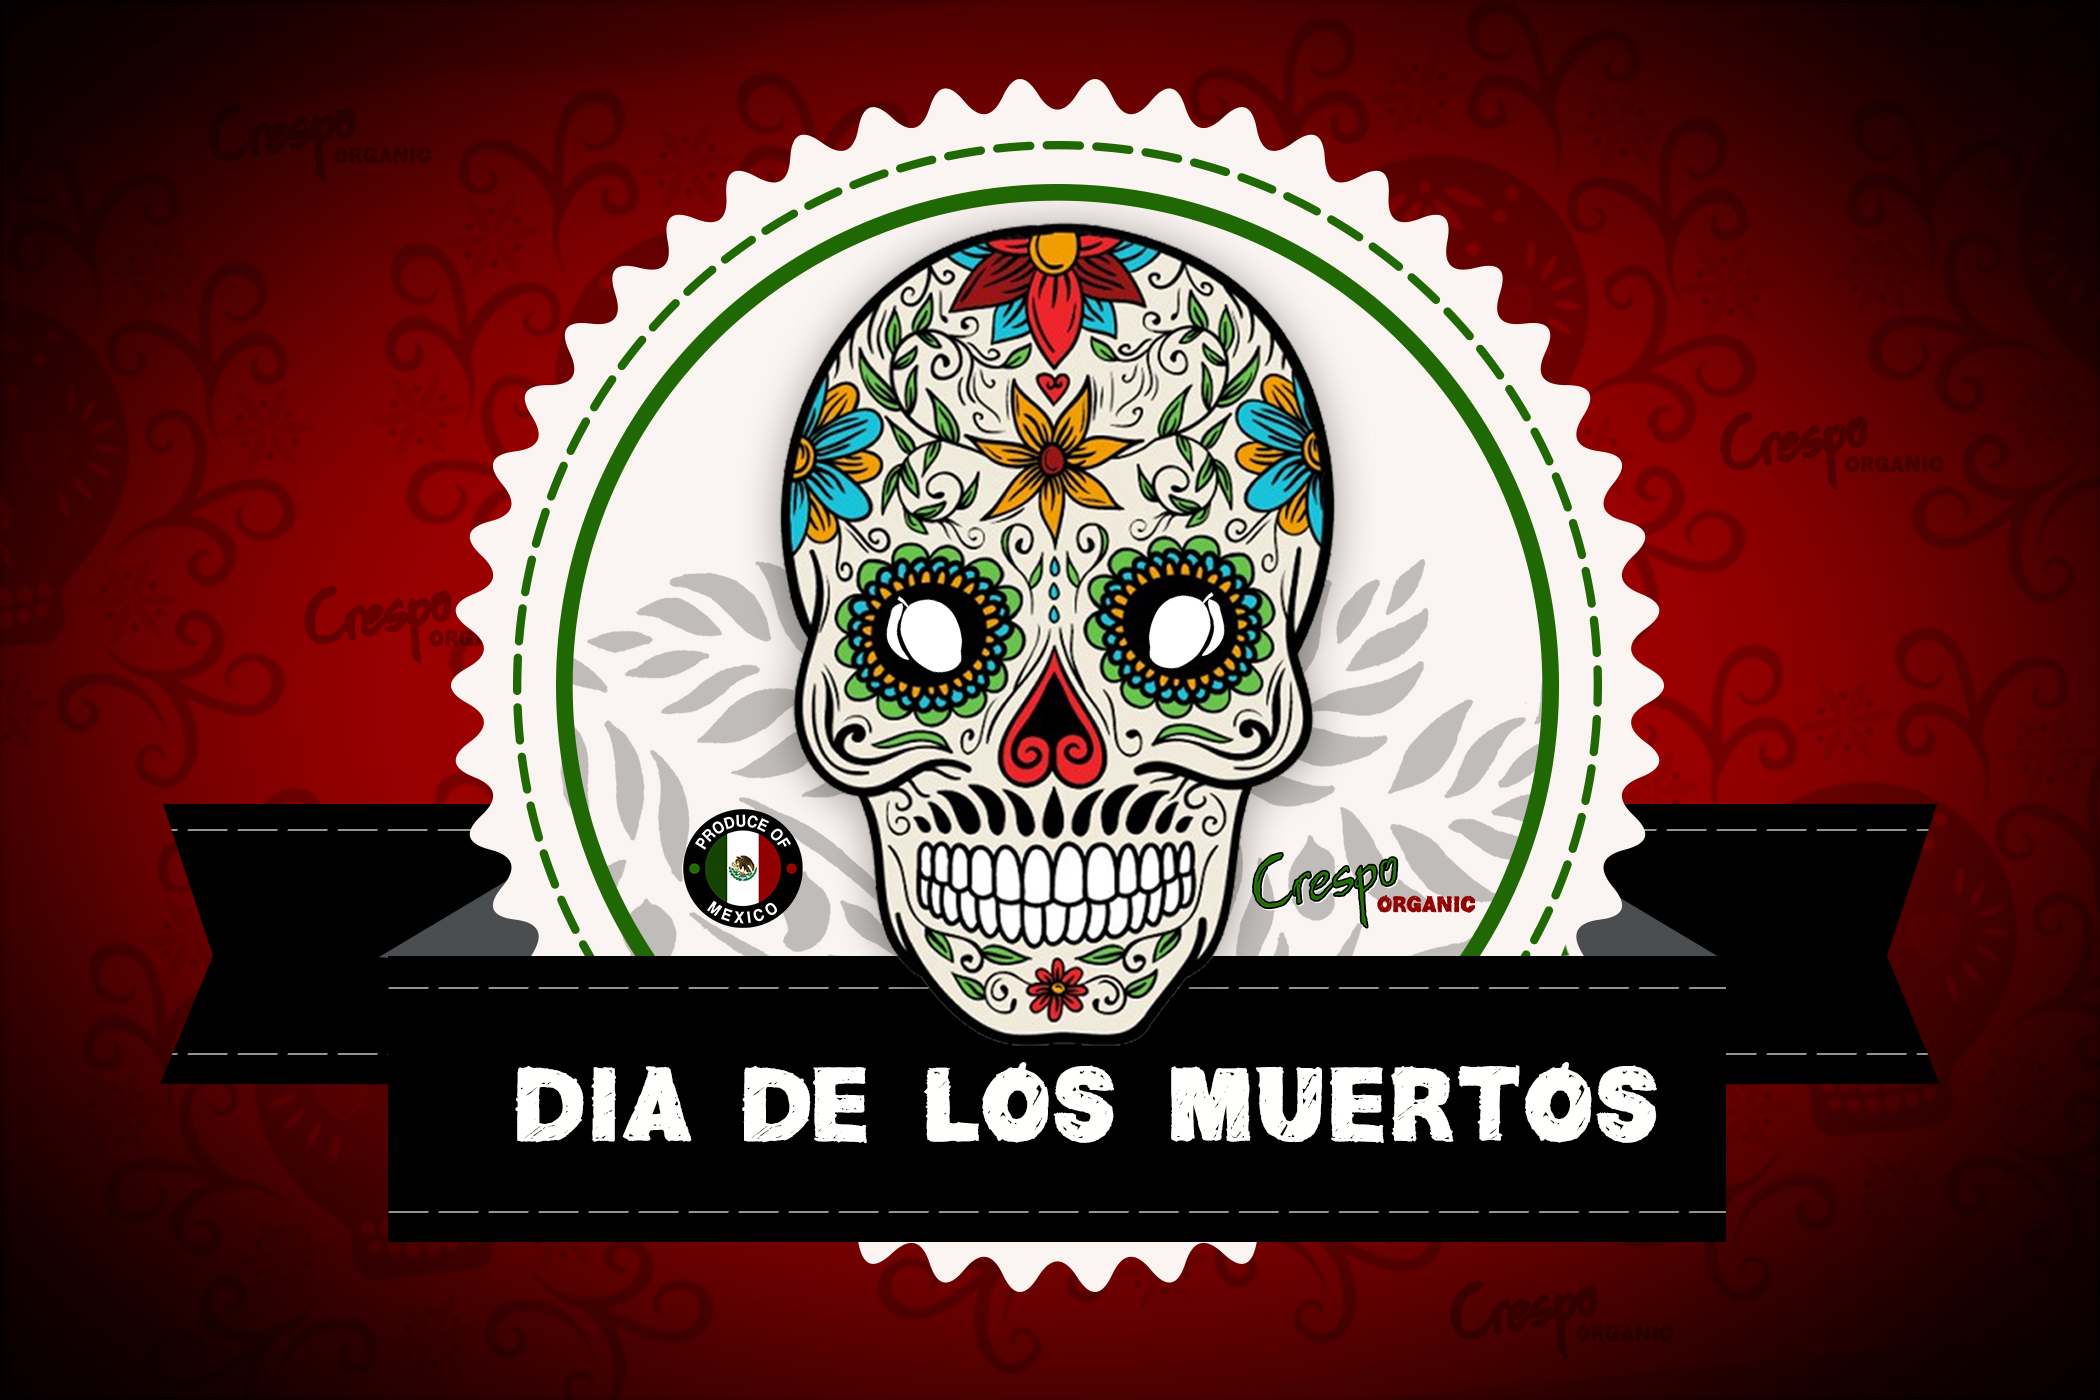 <a class="wonderplugin-gridgallery-posttitle-link" href="http://www.underthemangotree.crespoorganic.com/2019/11/01/day-of-the-dead/" target="_blank">Day of the Dead</a>